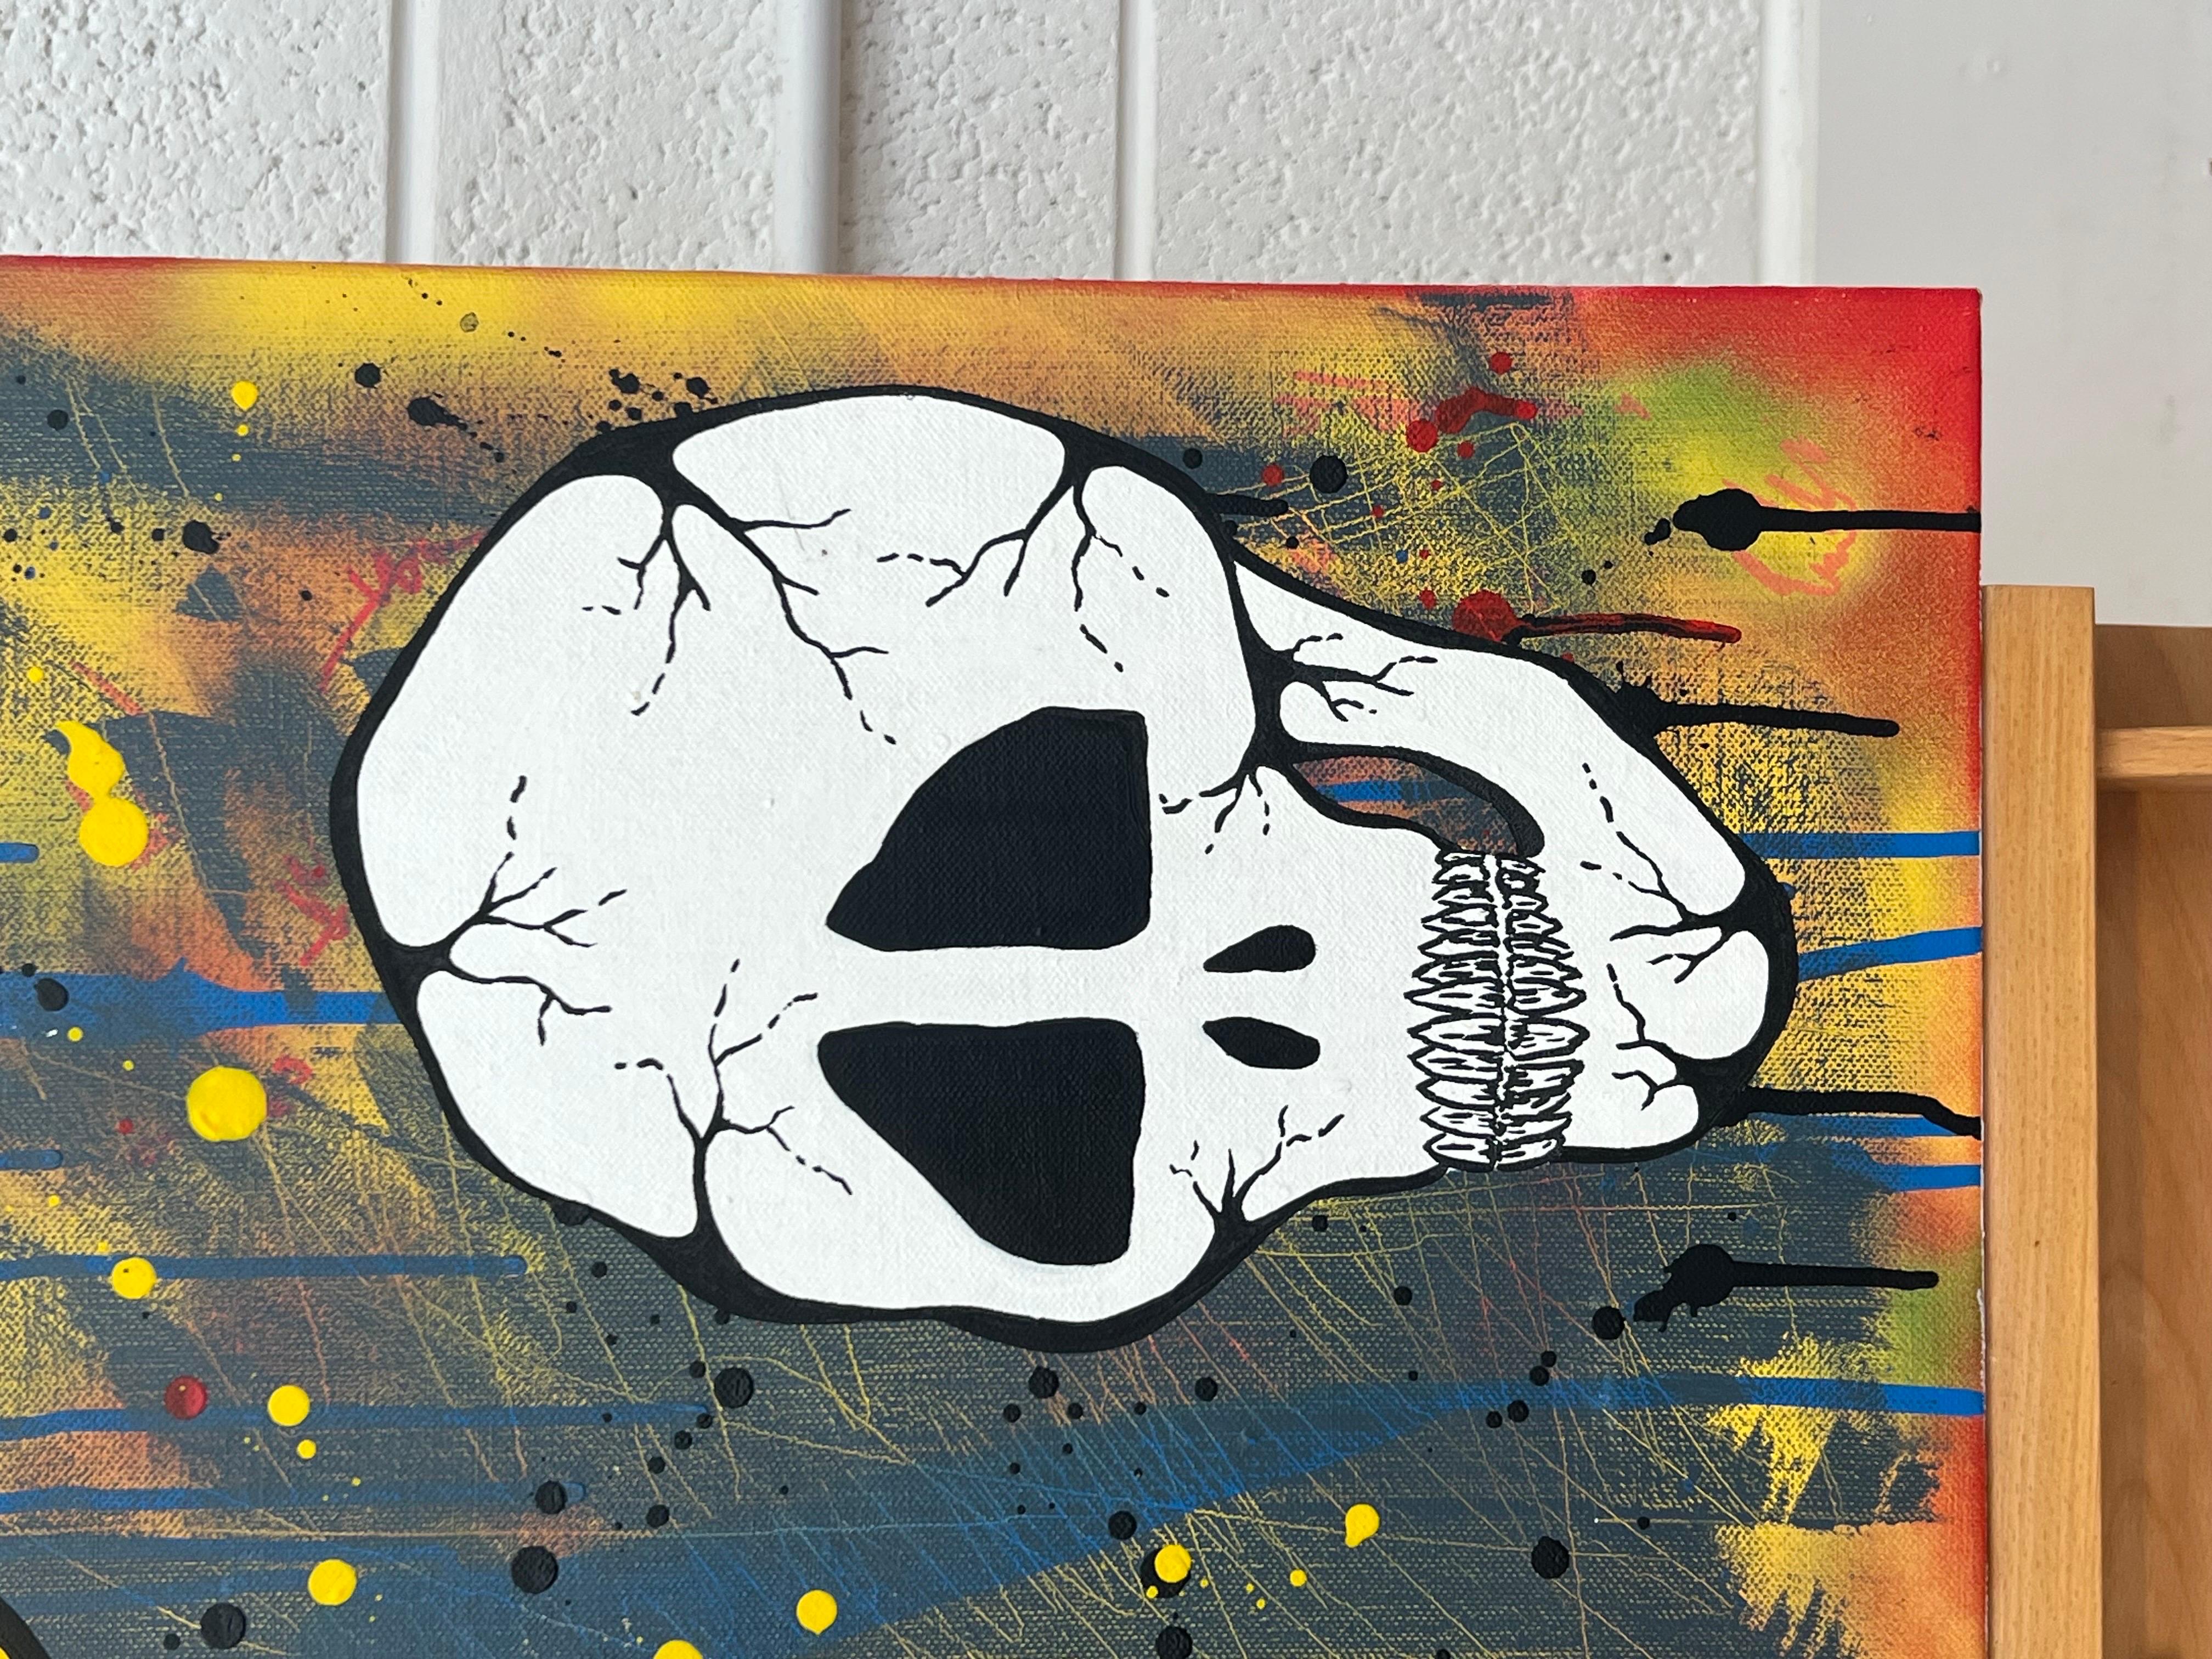 Skull & Emoji Cartoon Pop Art on Abstract Background by British Urban Graffiti Artist, Chris Pegg. Chris Pegg is a self-taught Street Artist producing artwork with a strong social commentary. 

His work is inspired by artists such as Mr Brainwash